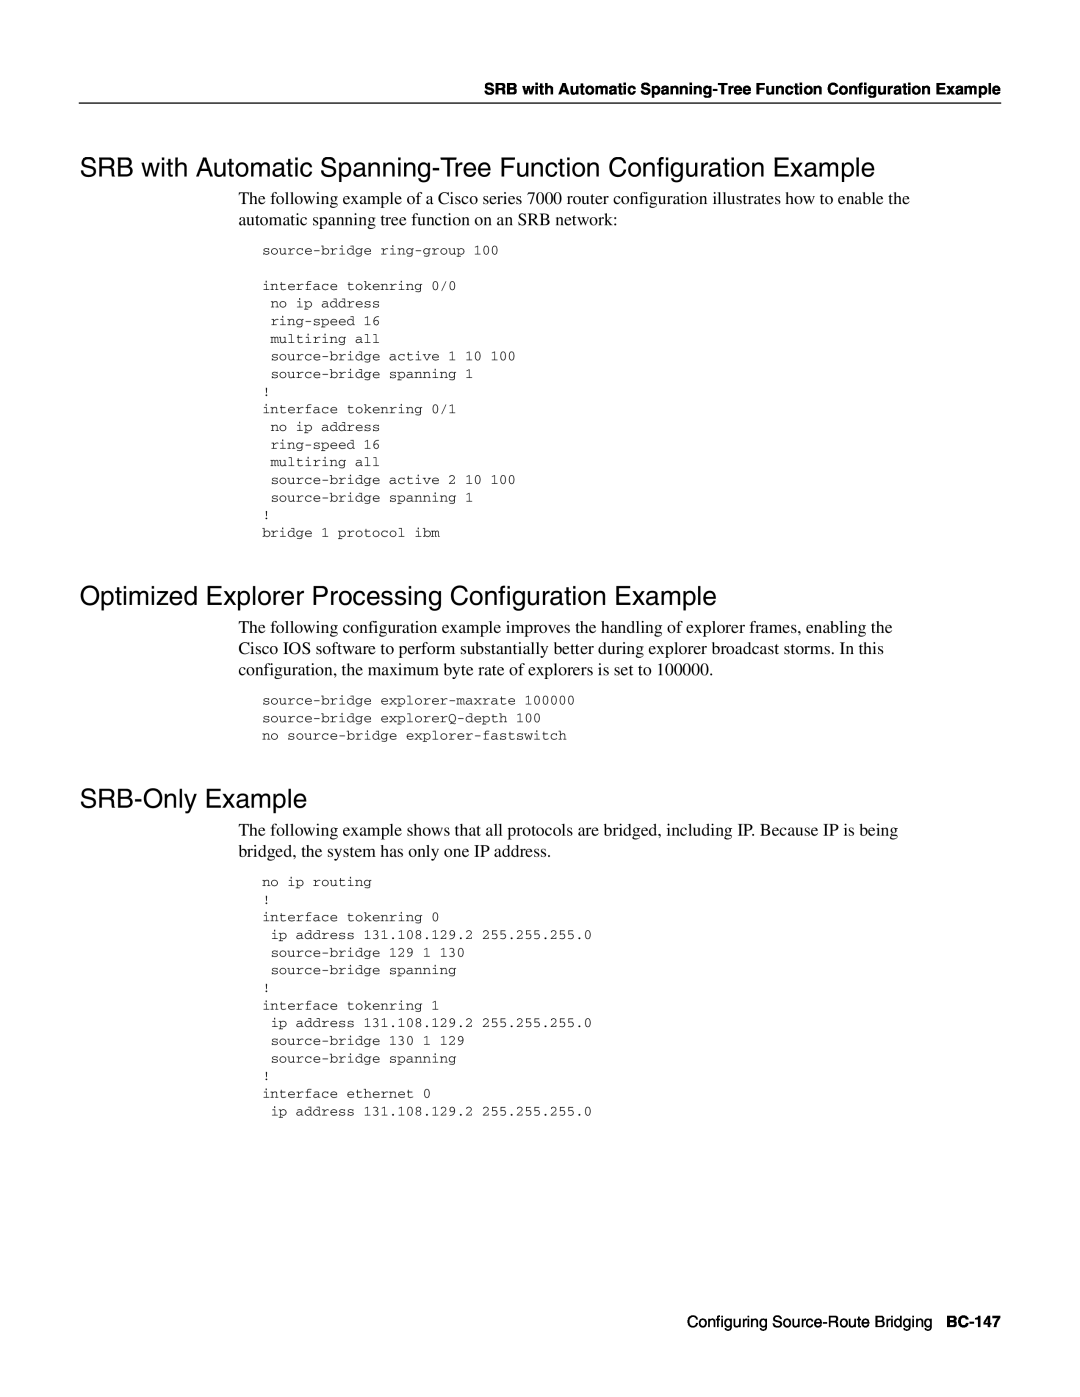 Cisco Systems BC-109 manual SRB with Automatic Spanning-Tree Function Configuration Example, SRB-Only Example 